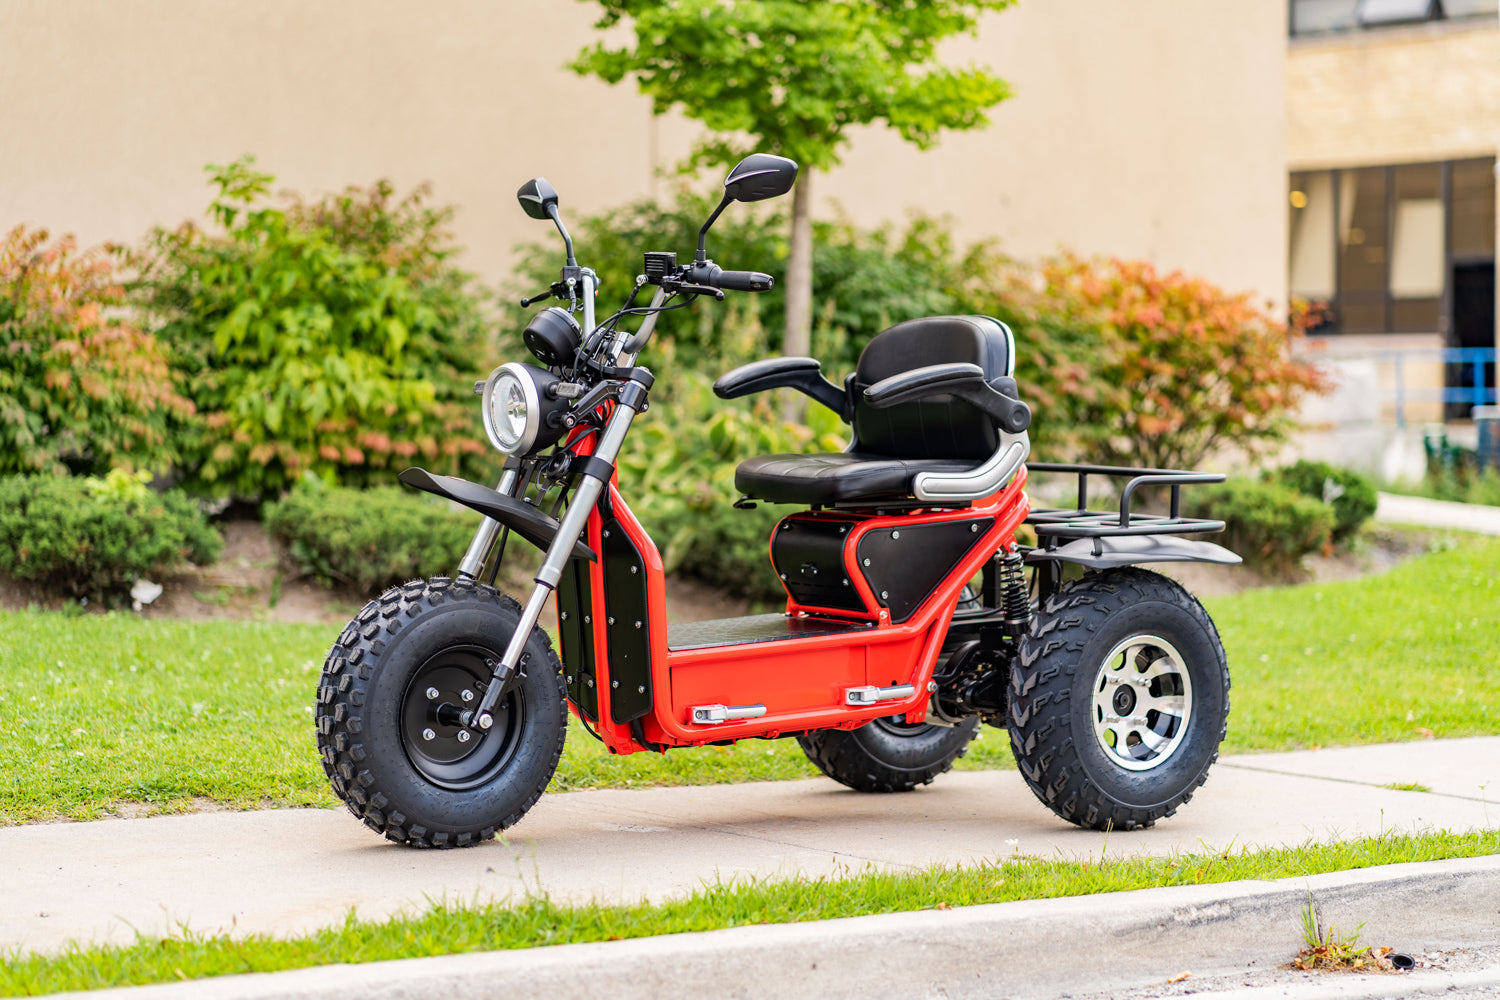 Invader Ultimate All-Terrain Off-Road All Wheel Drive Trike Mobility Scooter Road Legal